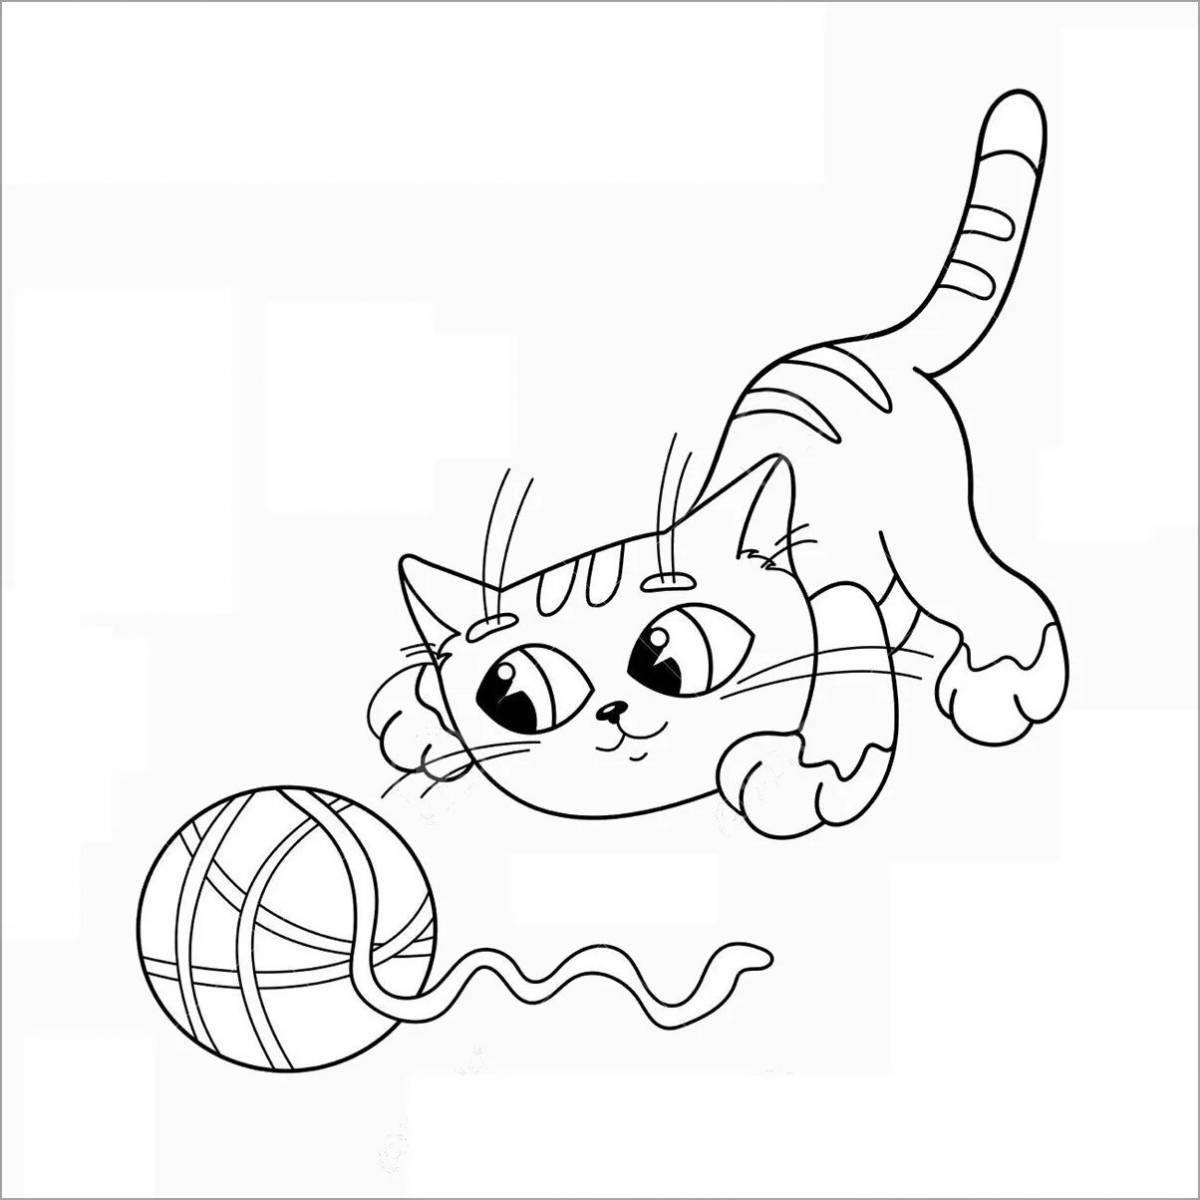 Adorable kitty coloring games